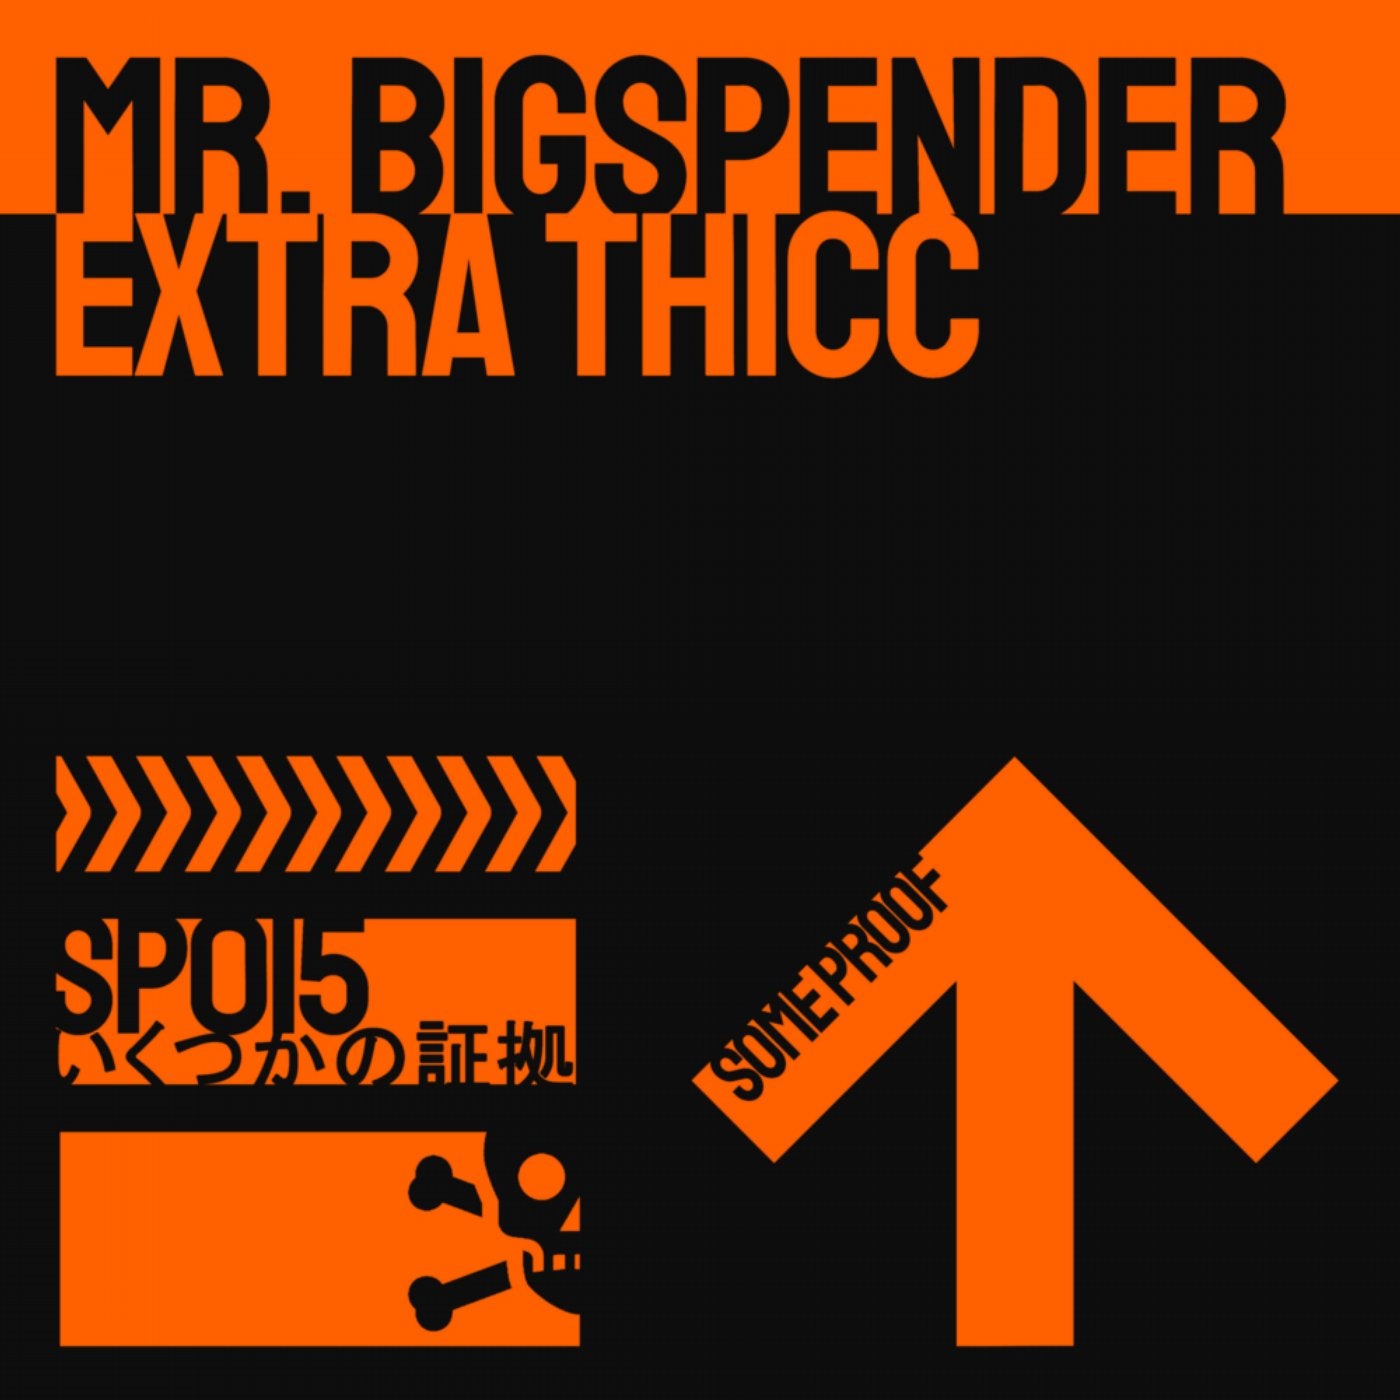 Extra Thicc